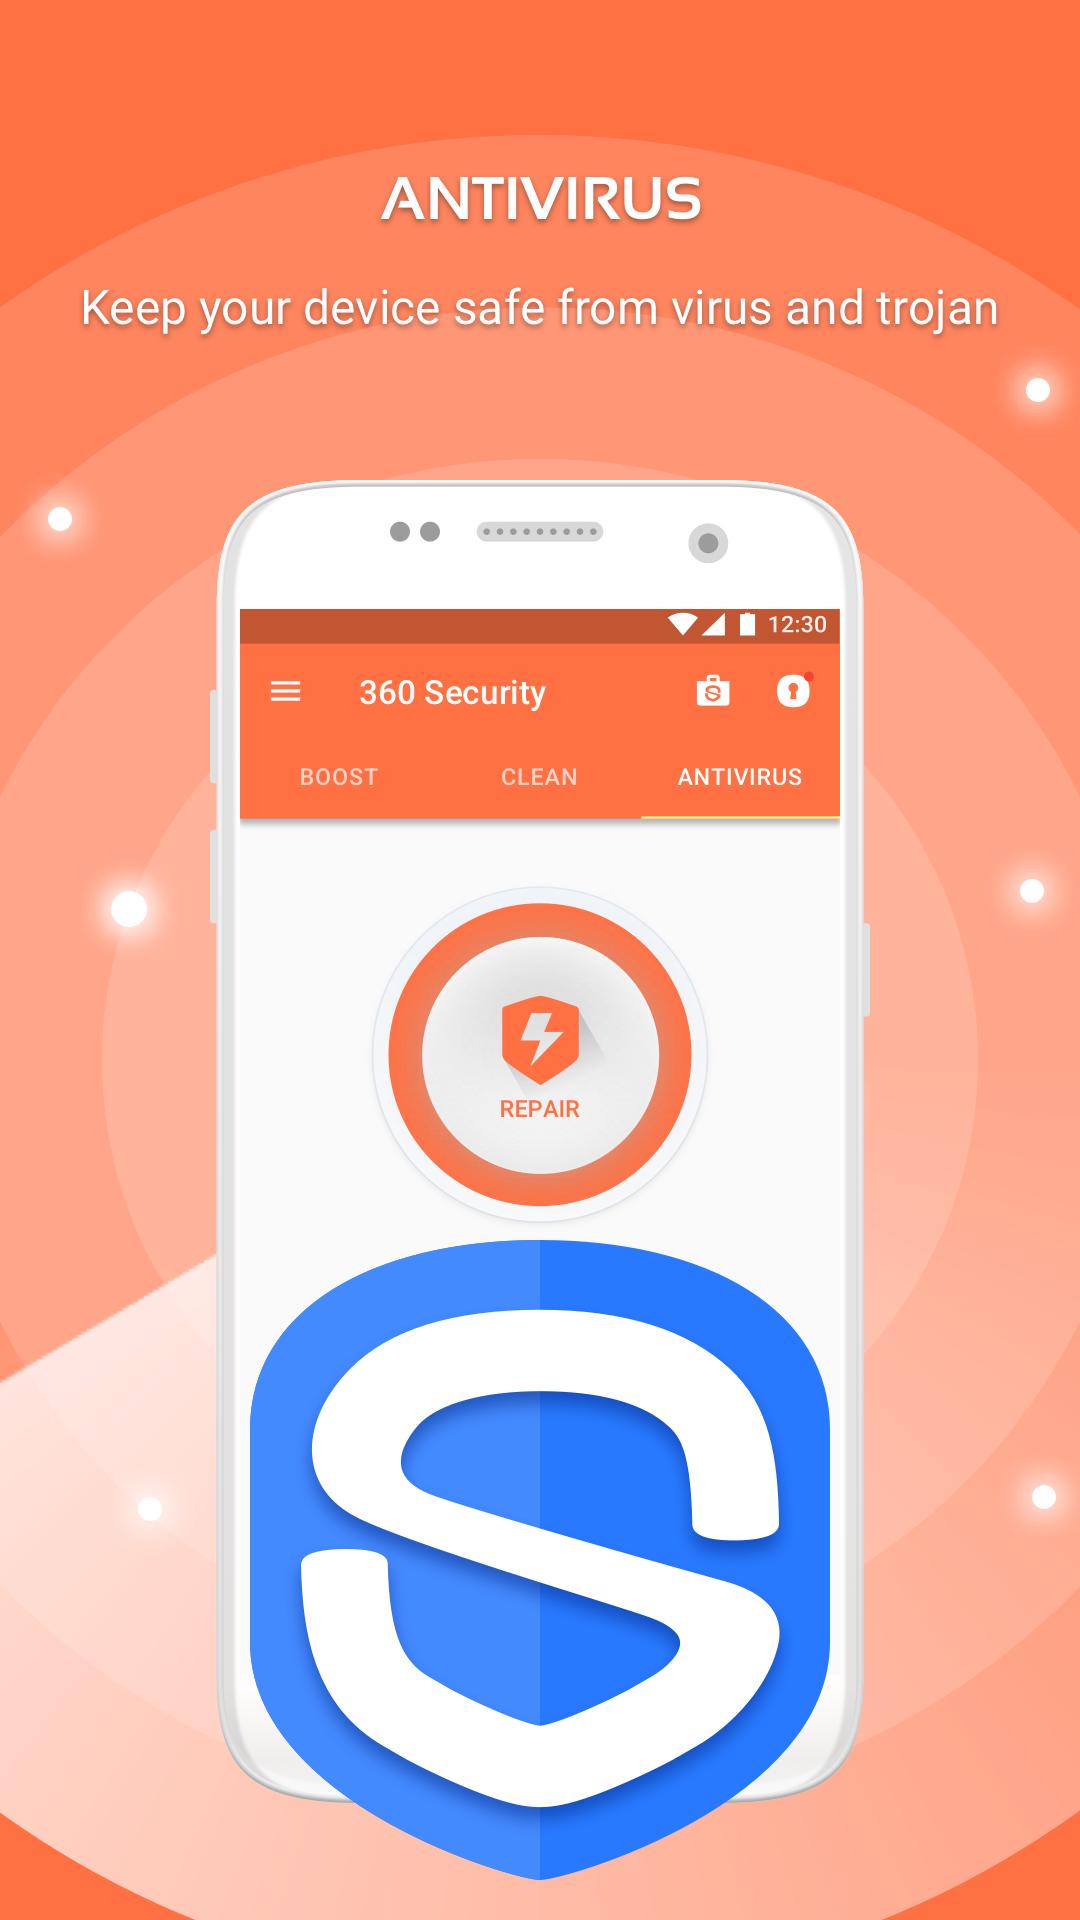 42 Top Photos Mobile Security App Download - 360 Mobile Security- Antivirus Free APP For Android ...